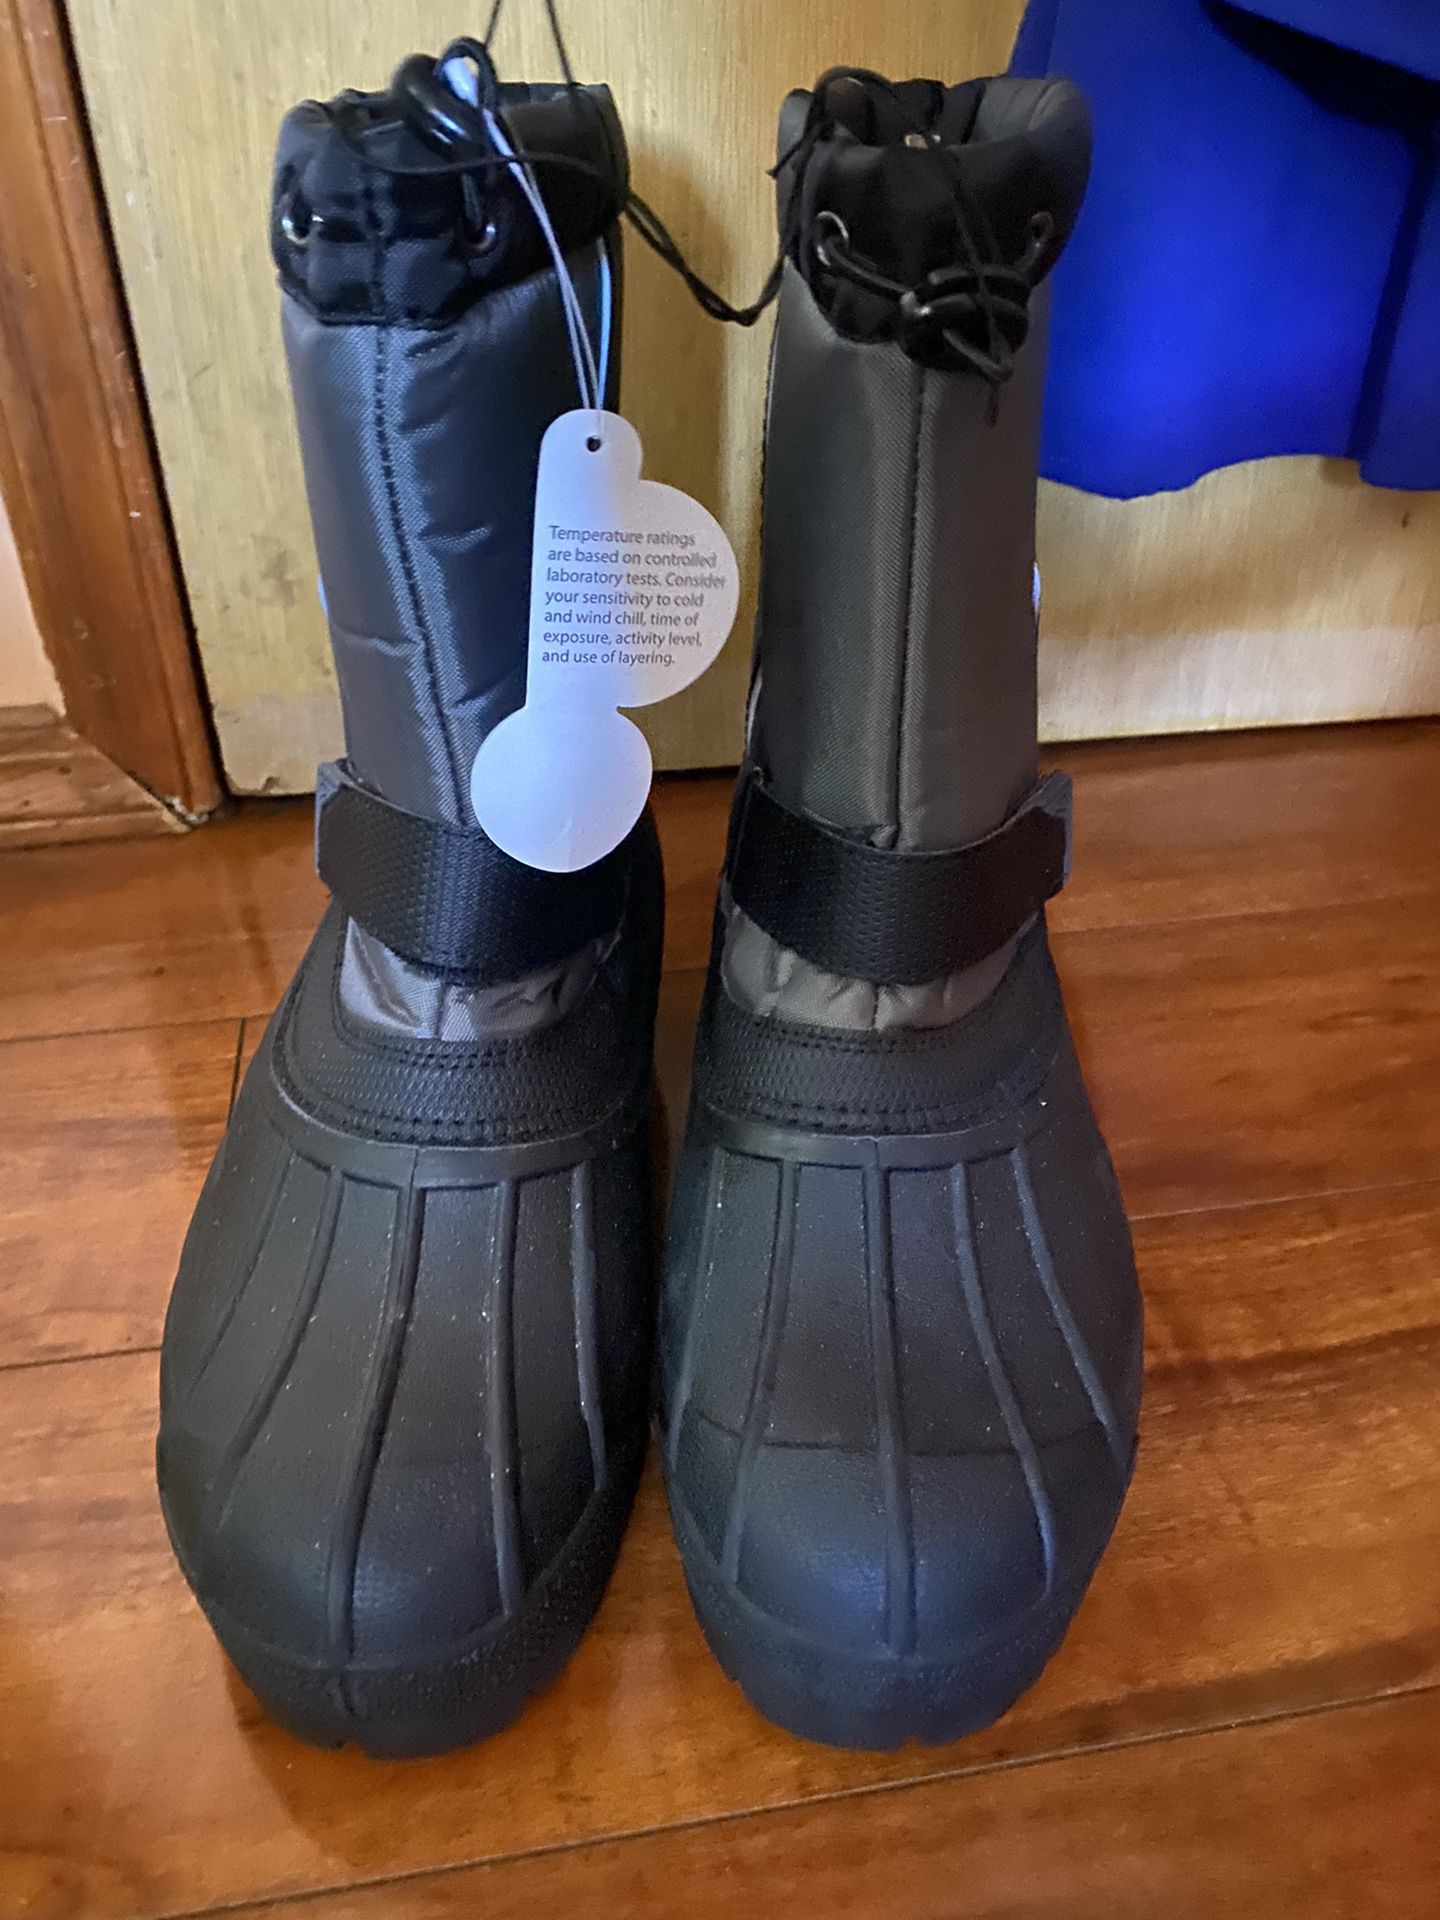 Amazing Snow Boots Size 9 New 